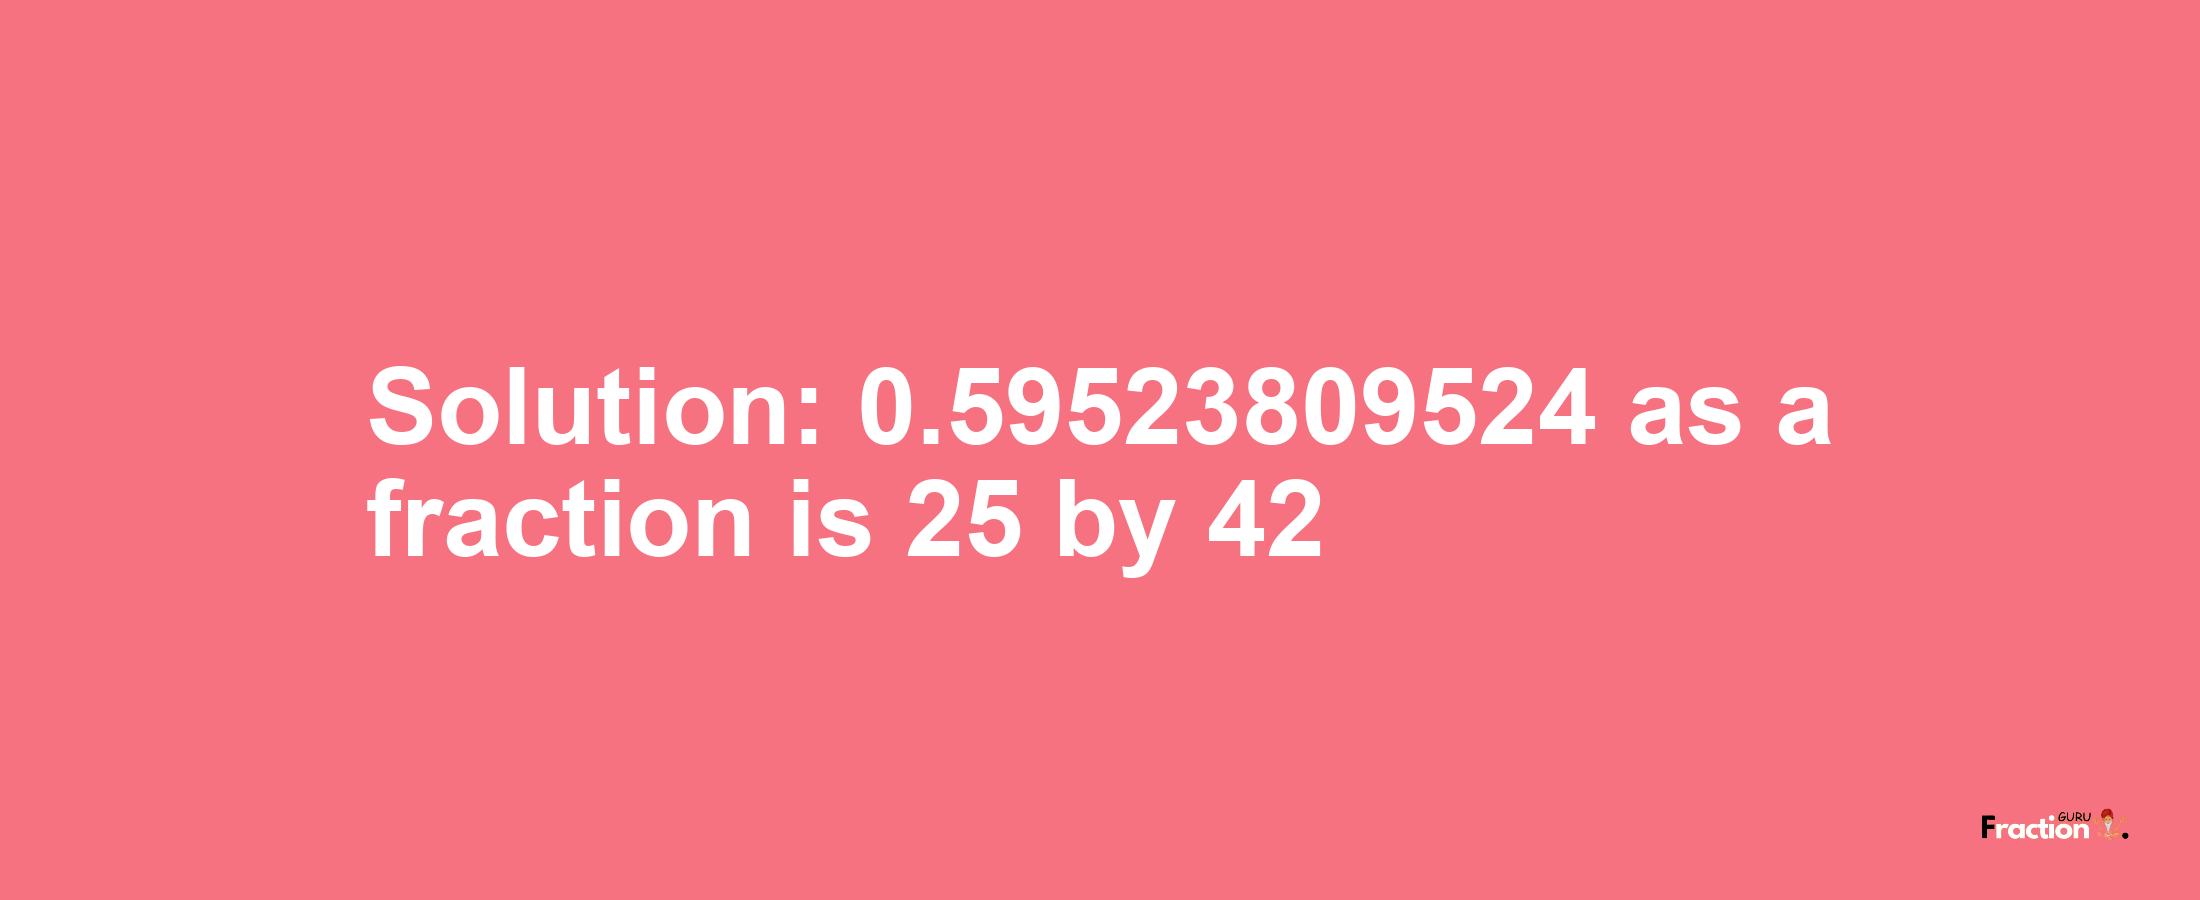 Solution:0.59523809524 as a fraction is 25/42